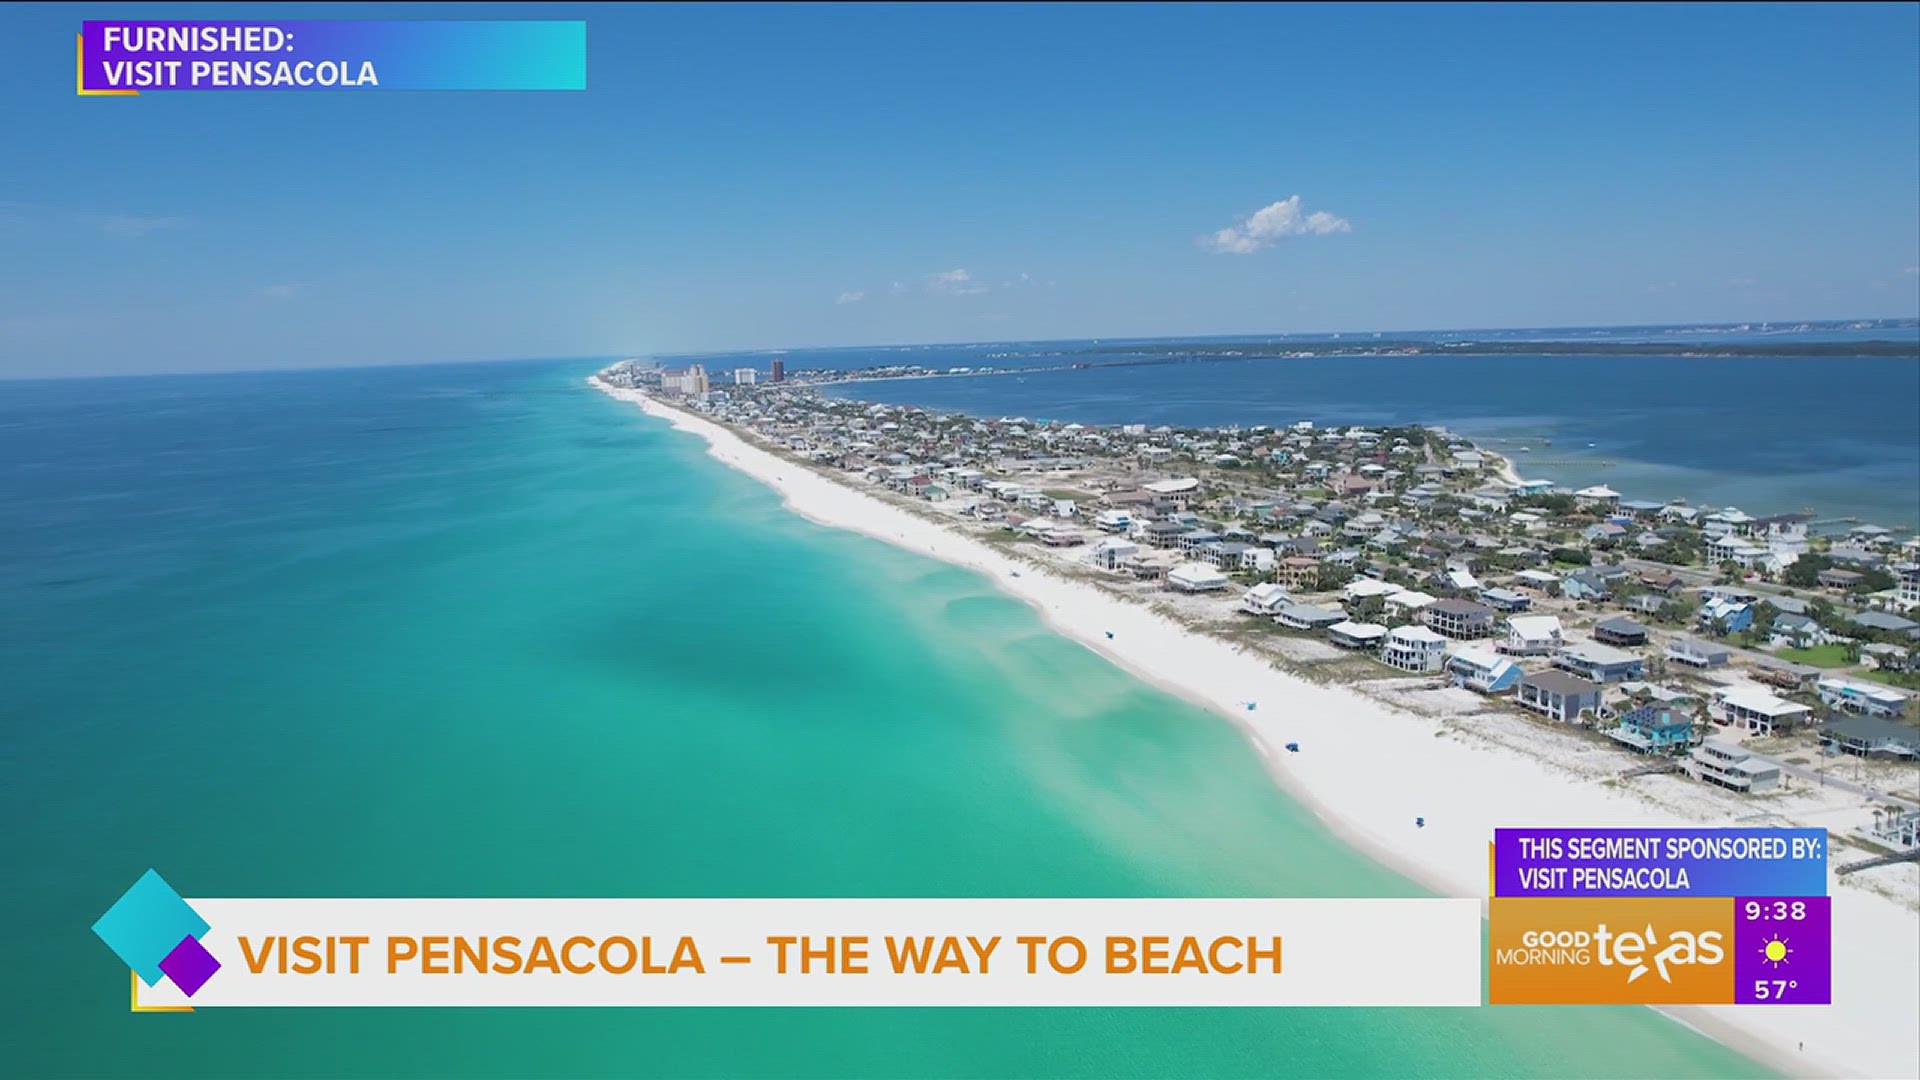 Learn why you should plan your trip now to Pensacola, Florida. This segment is sponsored by Visit Pensacola. Call 800.974.1234 or go to visitpensacola.com for info.